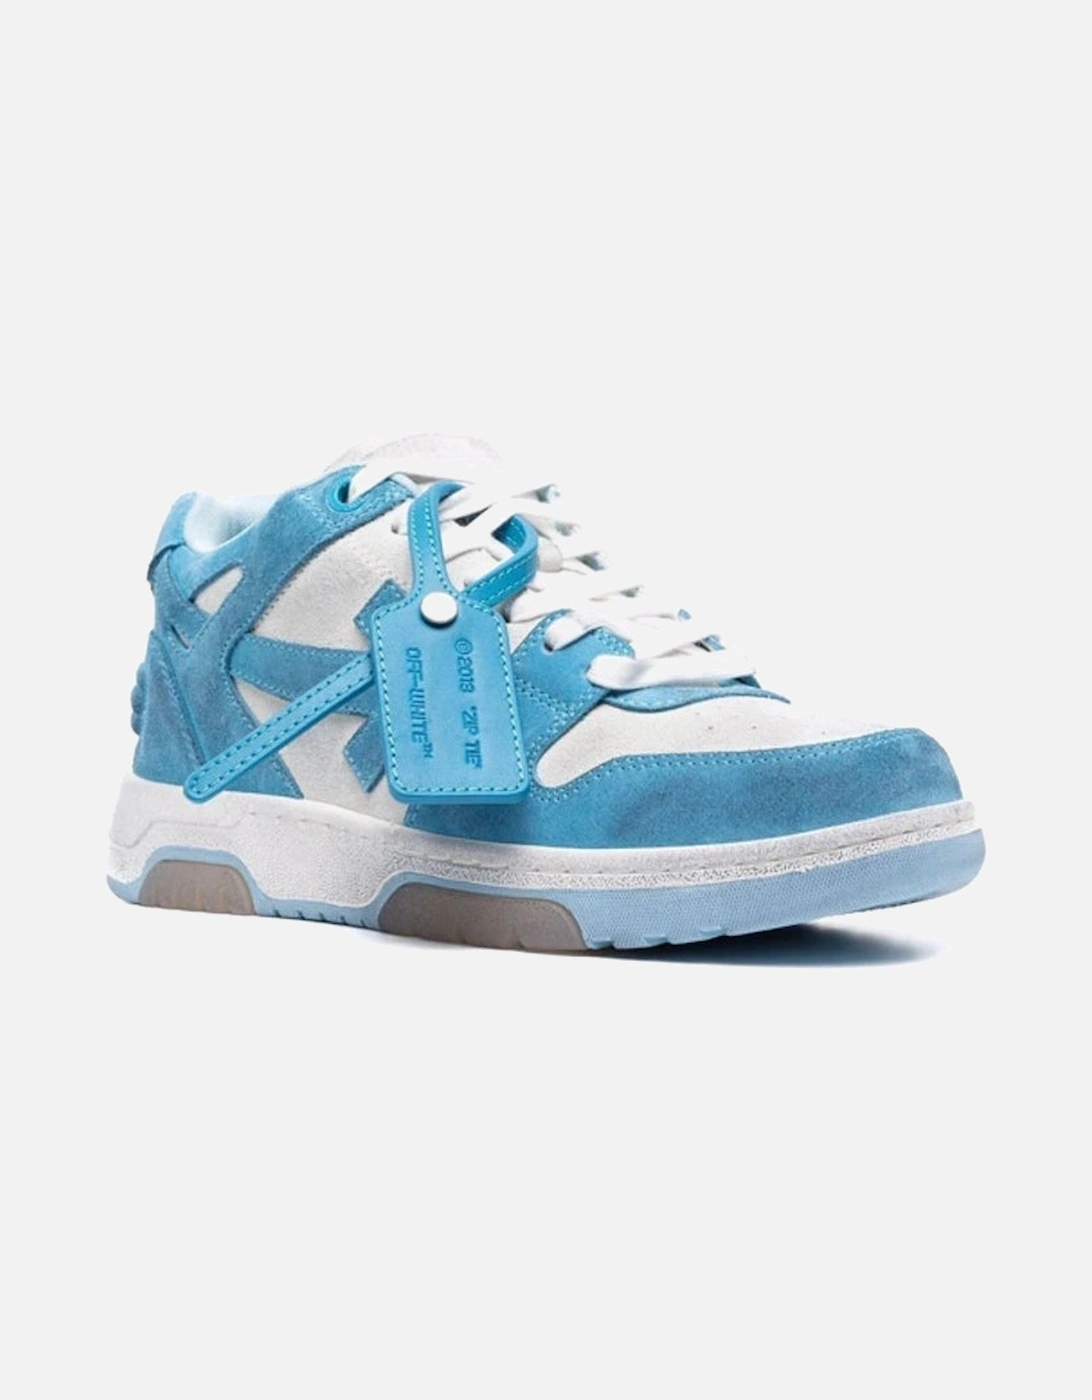 Out of Office Vintage Suede Trainers in Blue/White